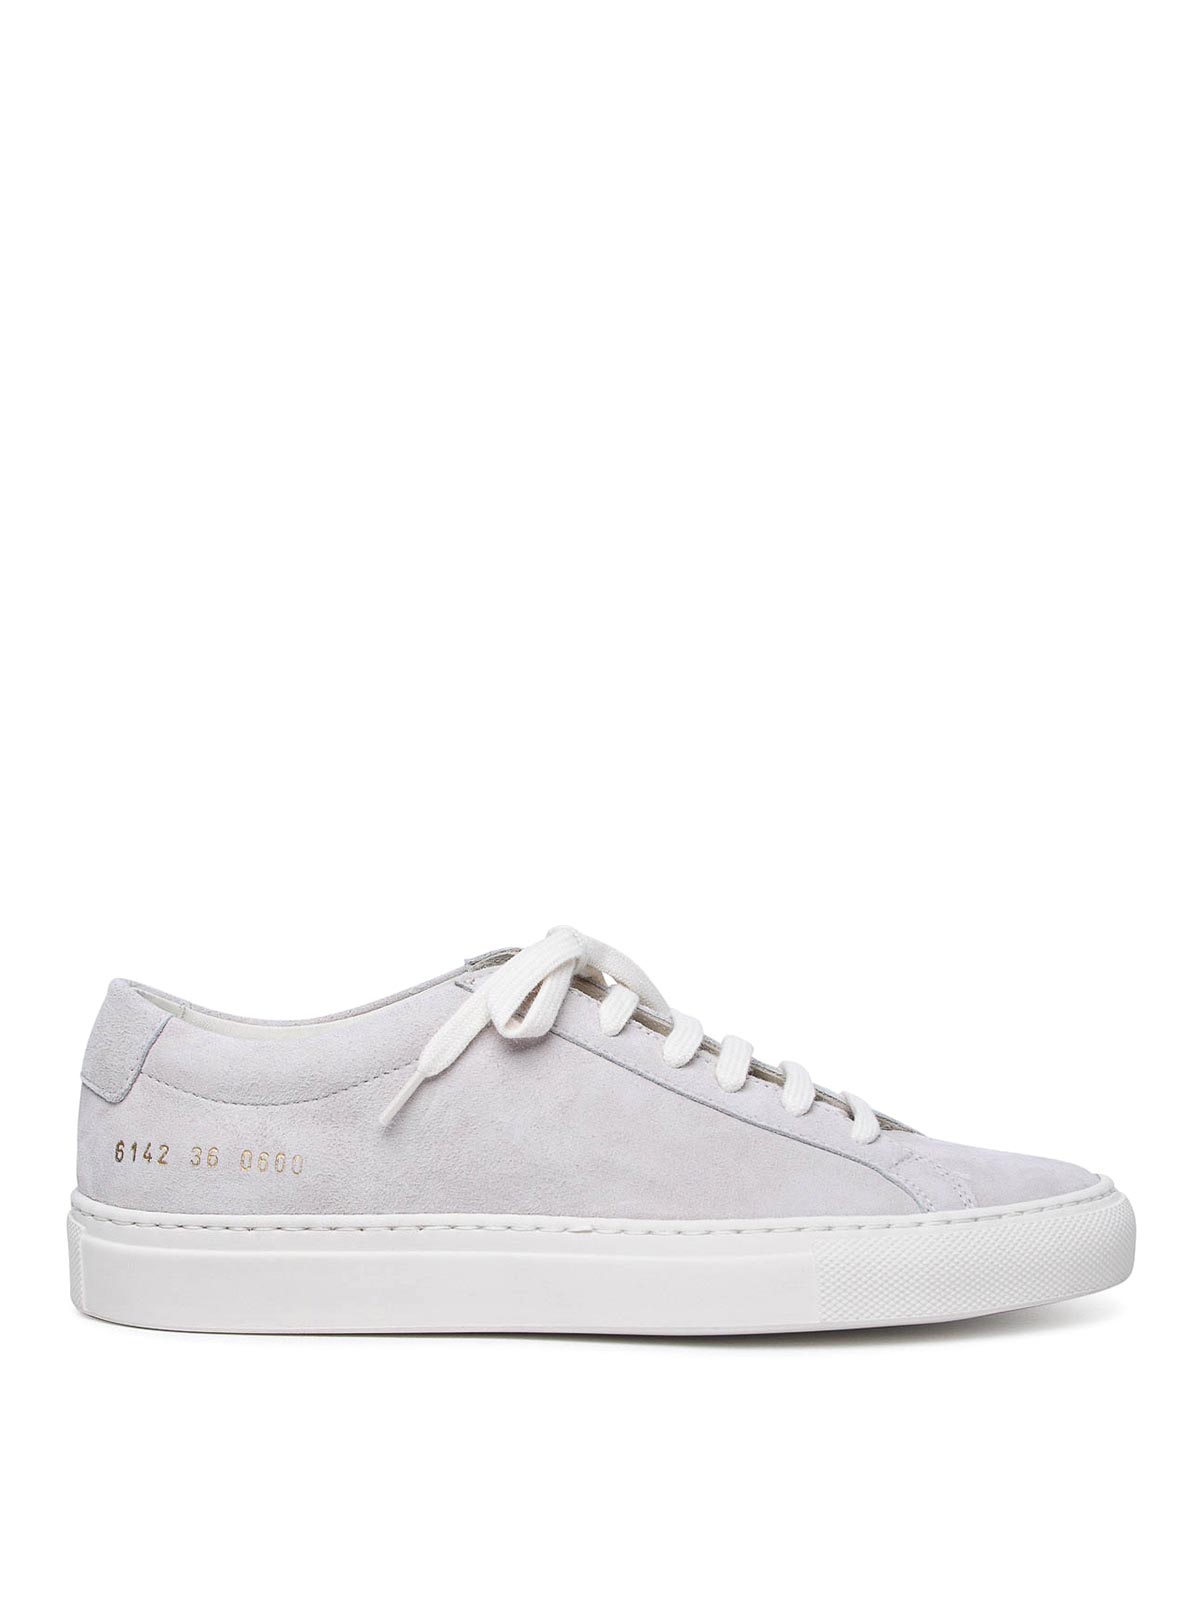 Common Projects Achilles Suede Sneakers In Gray